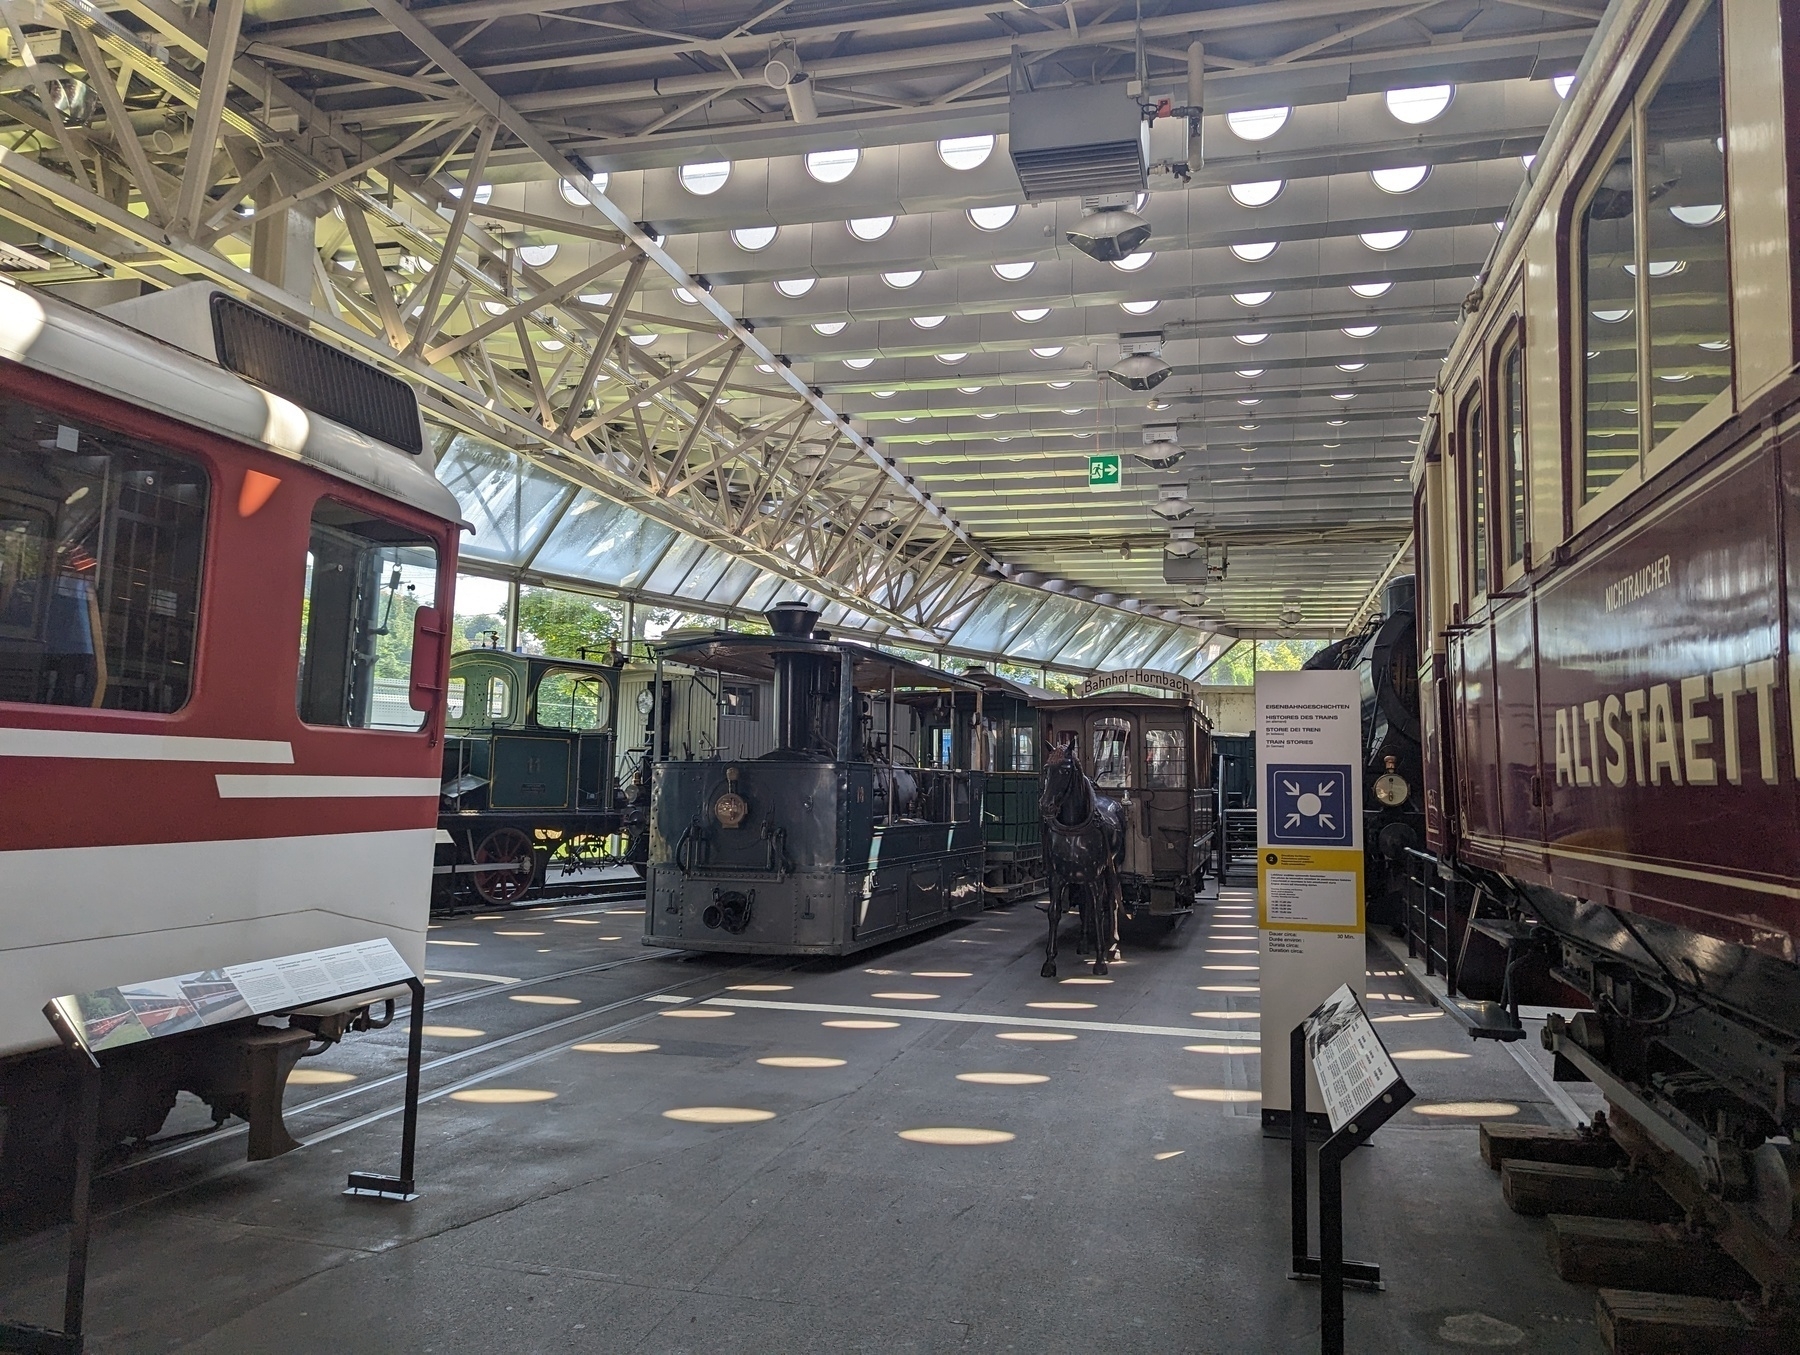 A collection of stem locomotives in an exhibition centre.